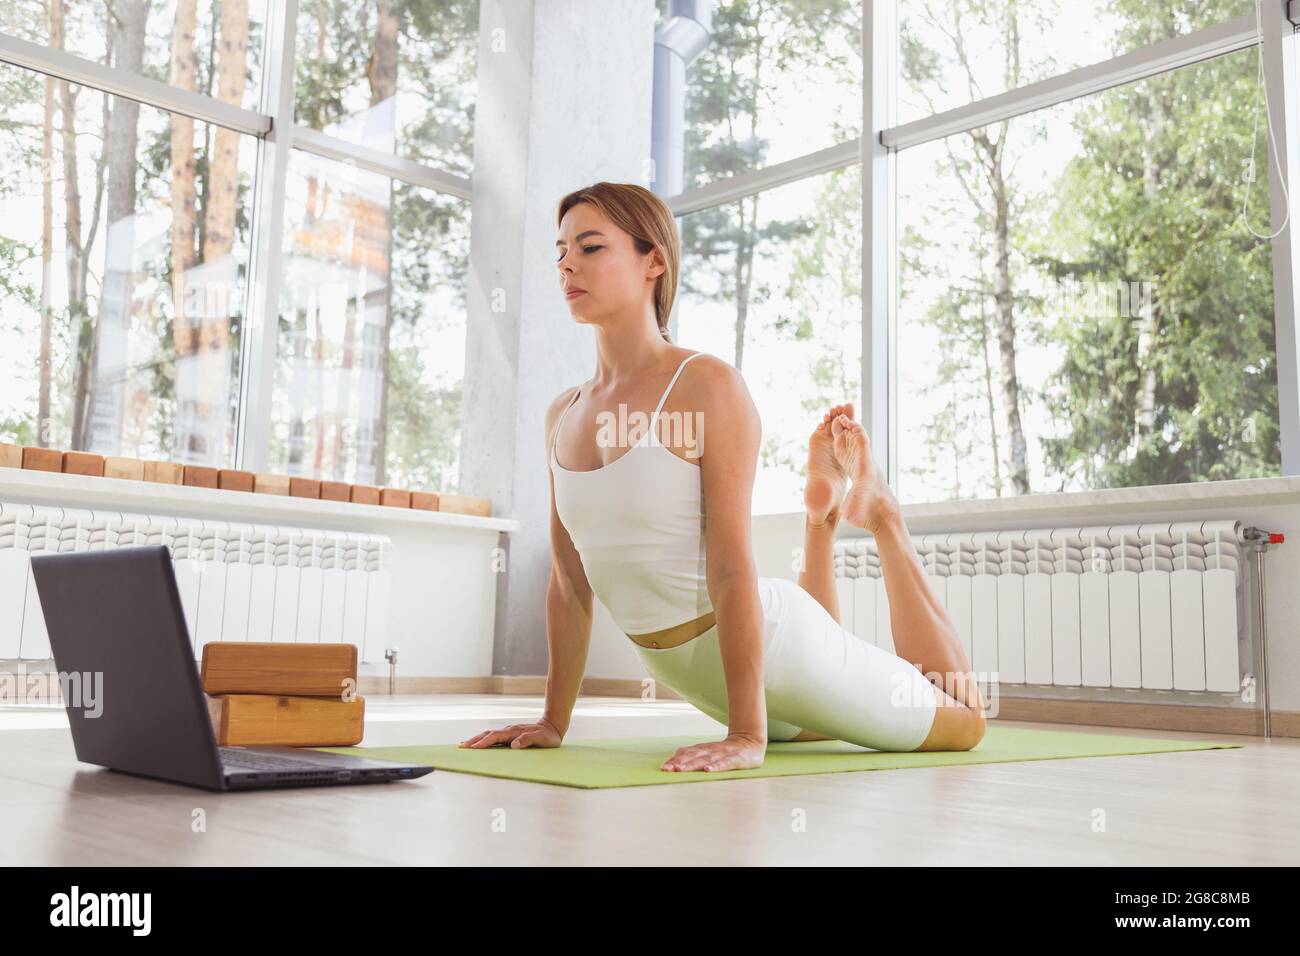 Young fit woman in sportswear doing sport or yoga online with laptop. Remote workouts, online trainer. Stock Photo